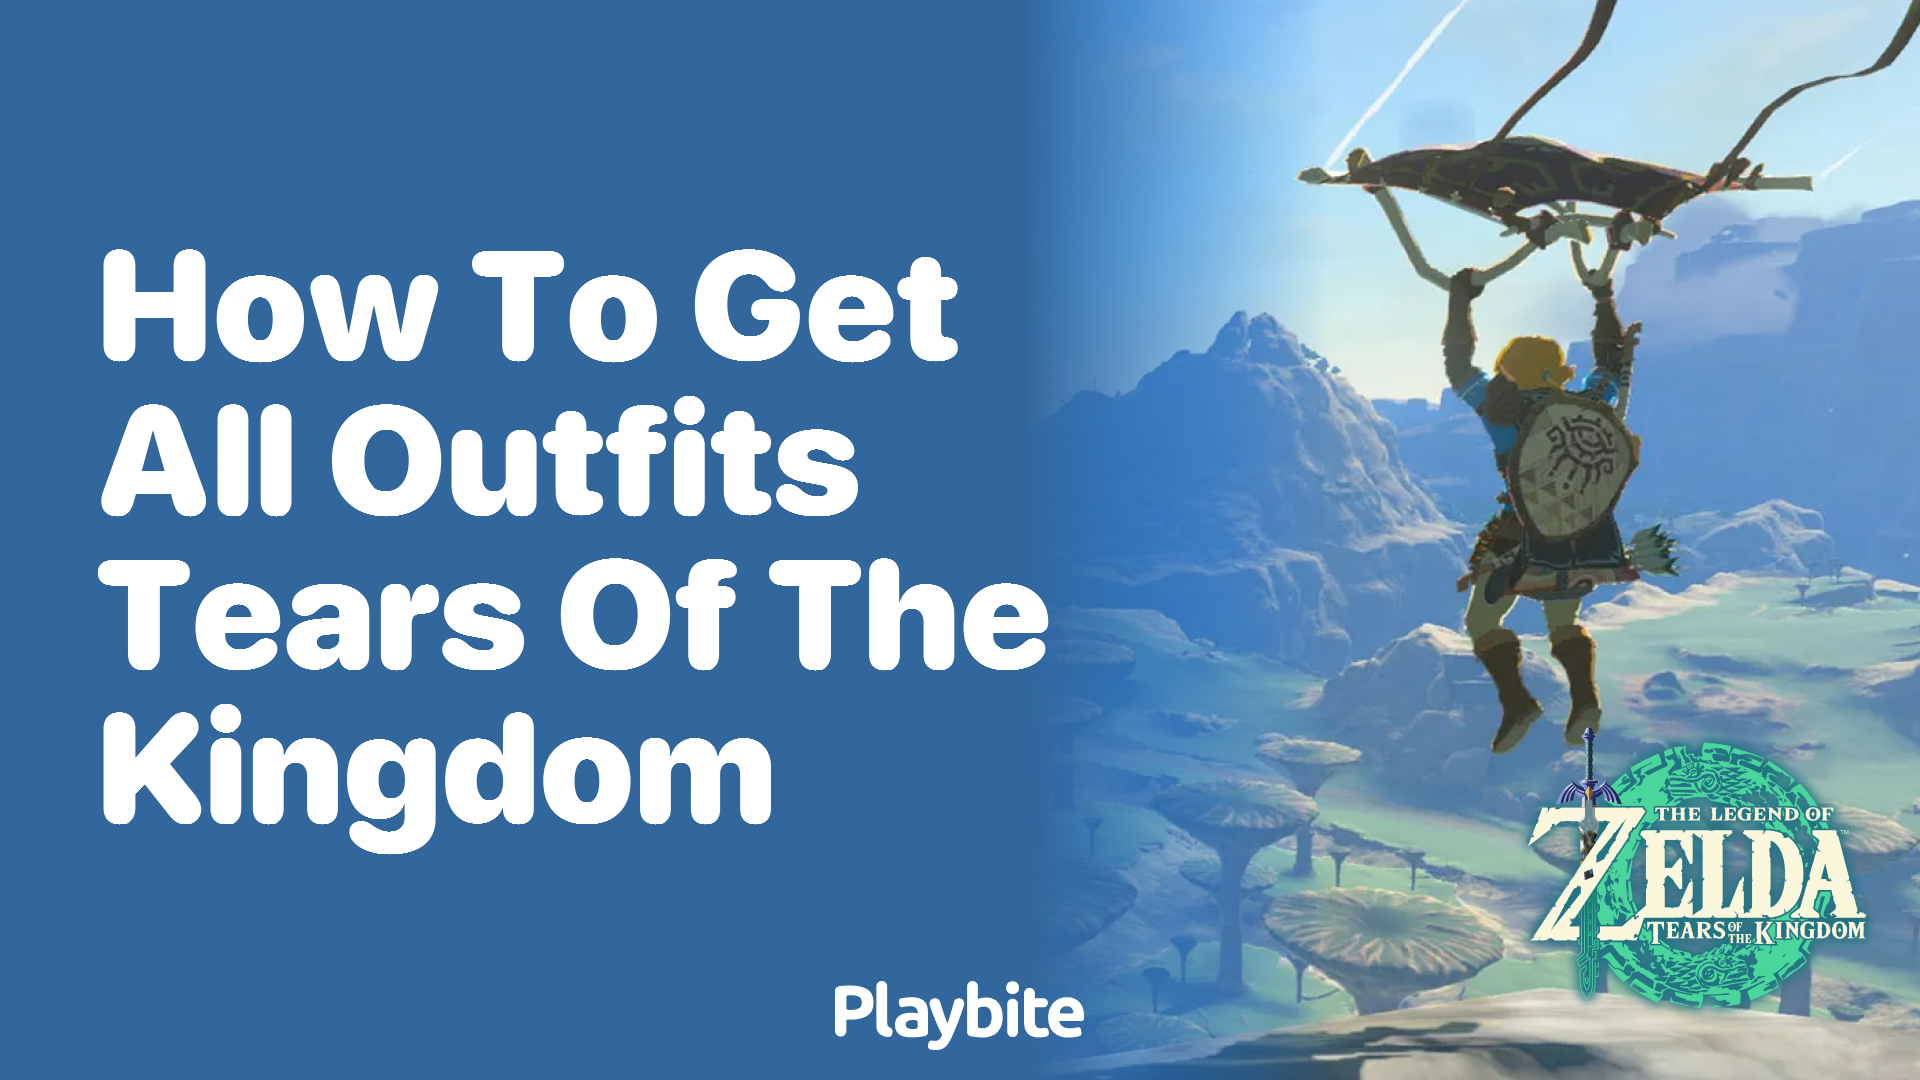 How to Get All Outfits in Tears of the Kingdom